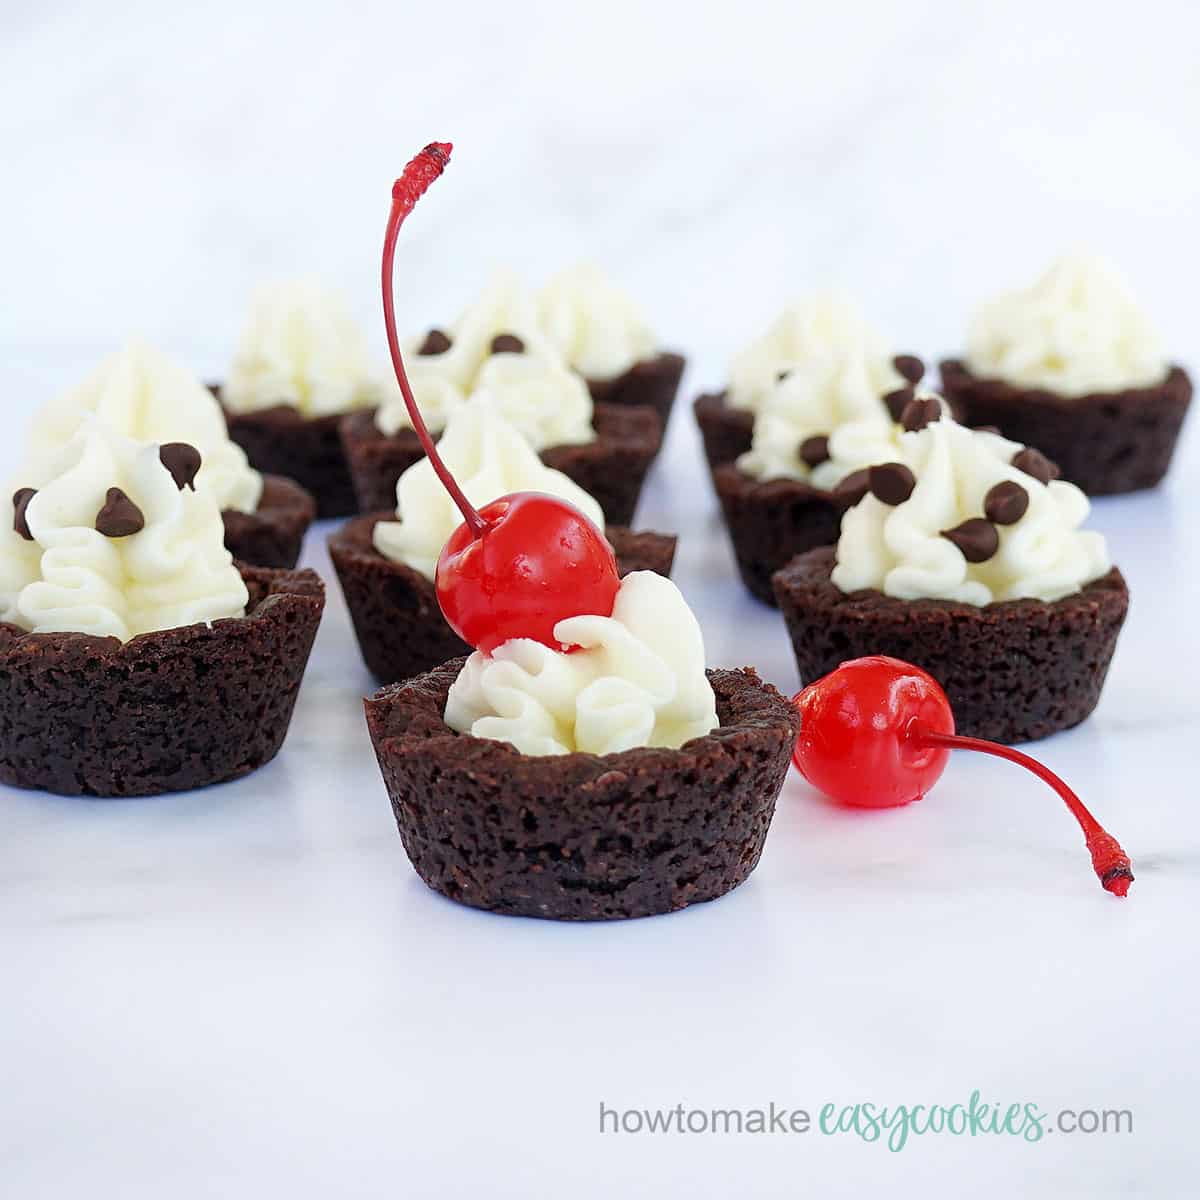 chocolate cookie cups with cream cheese frosting, maraschino cherries and mini chocolate chips